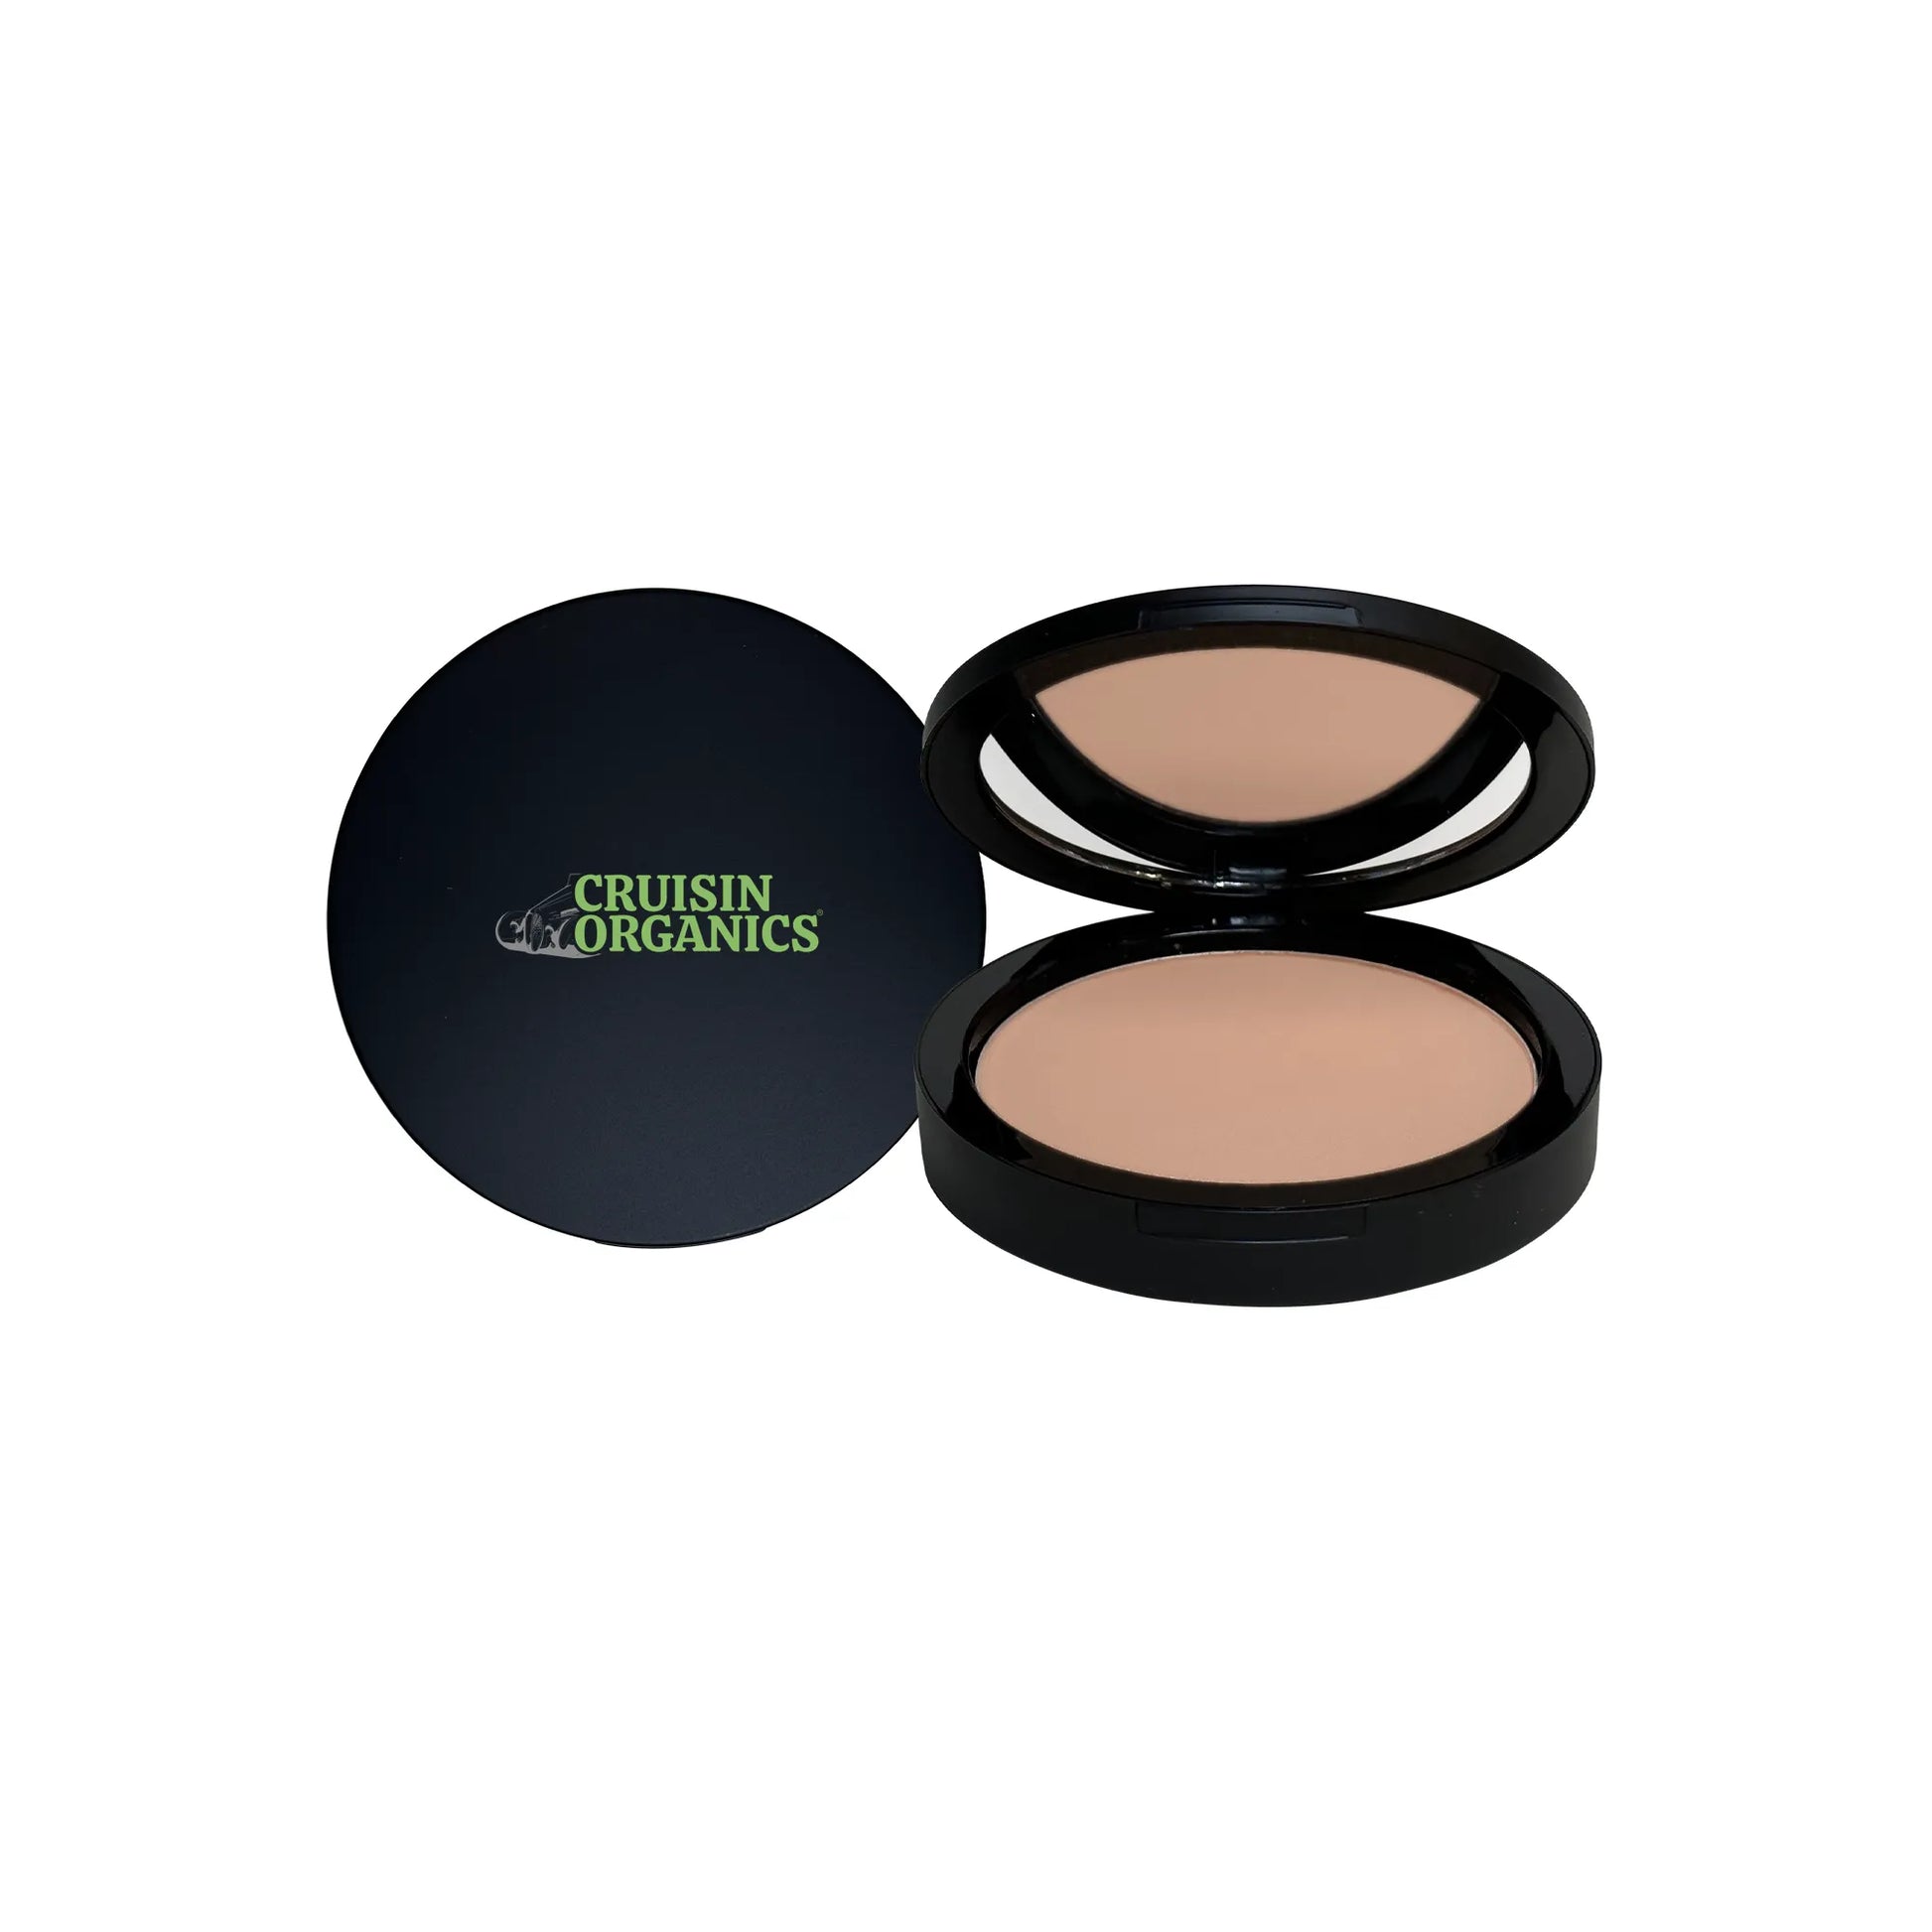 Malibu Powder Foundation Dual Blend SPF from Cruisin Organics offers a unique and effective solution for flawless, sun-protected skin.